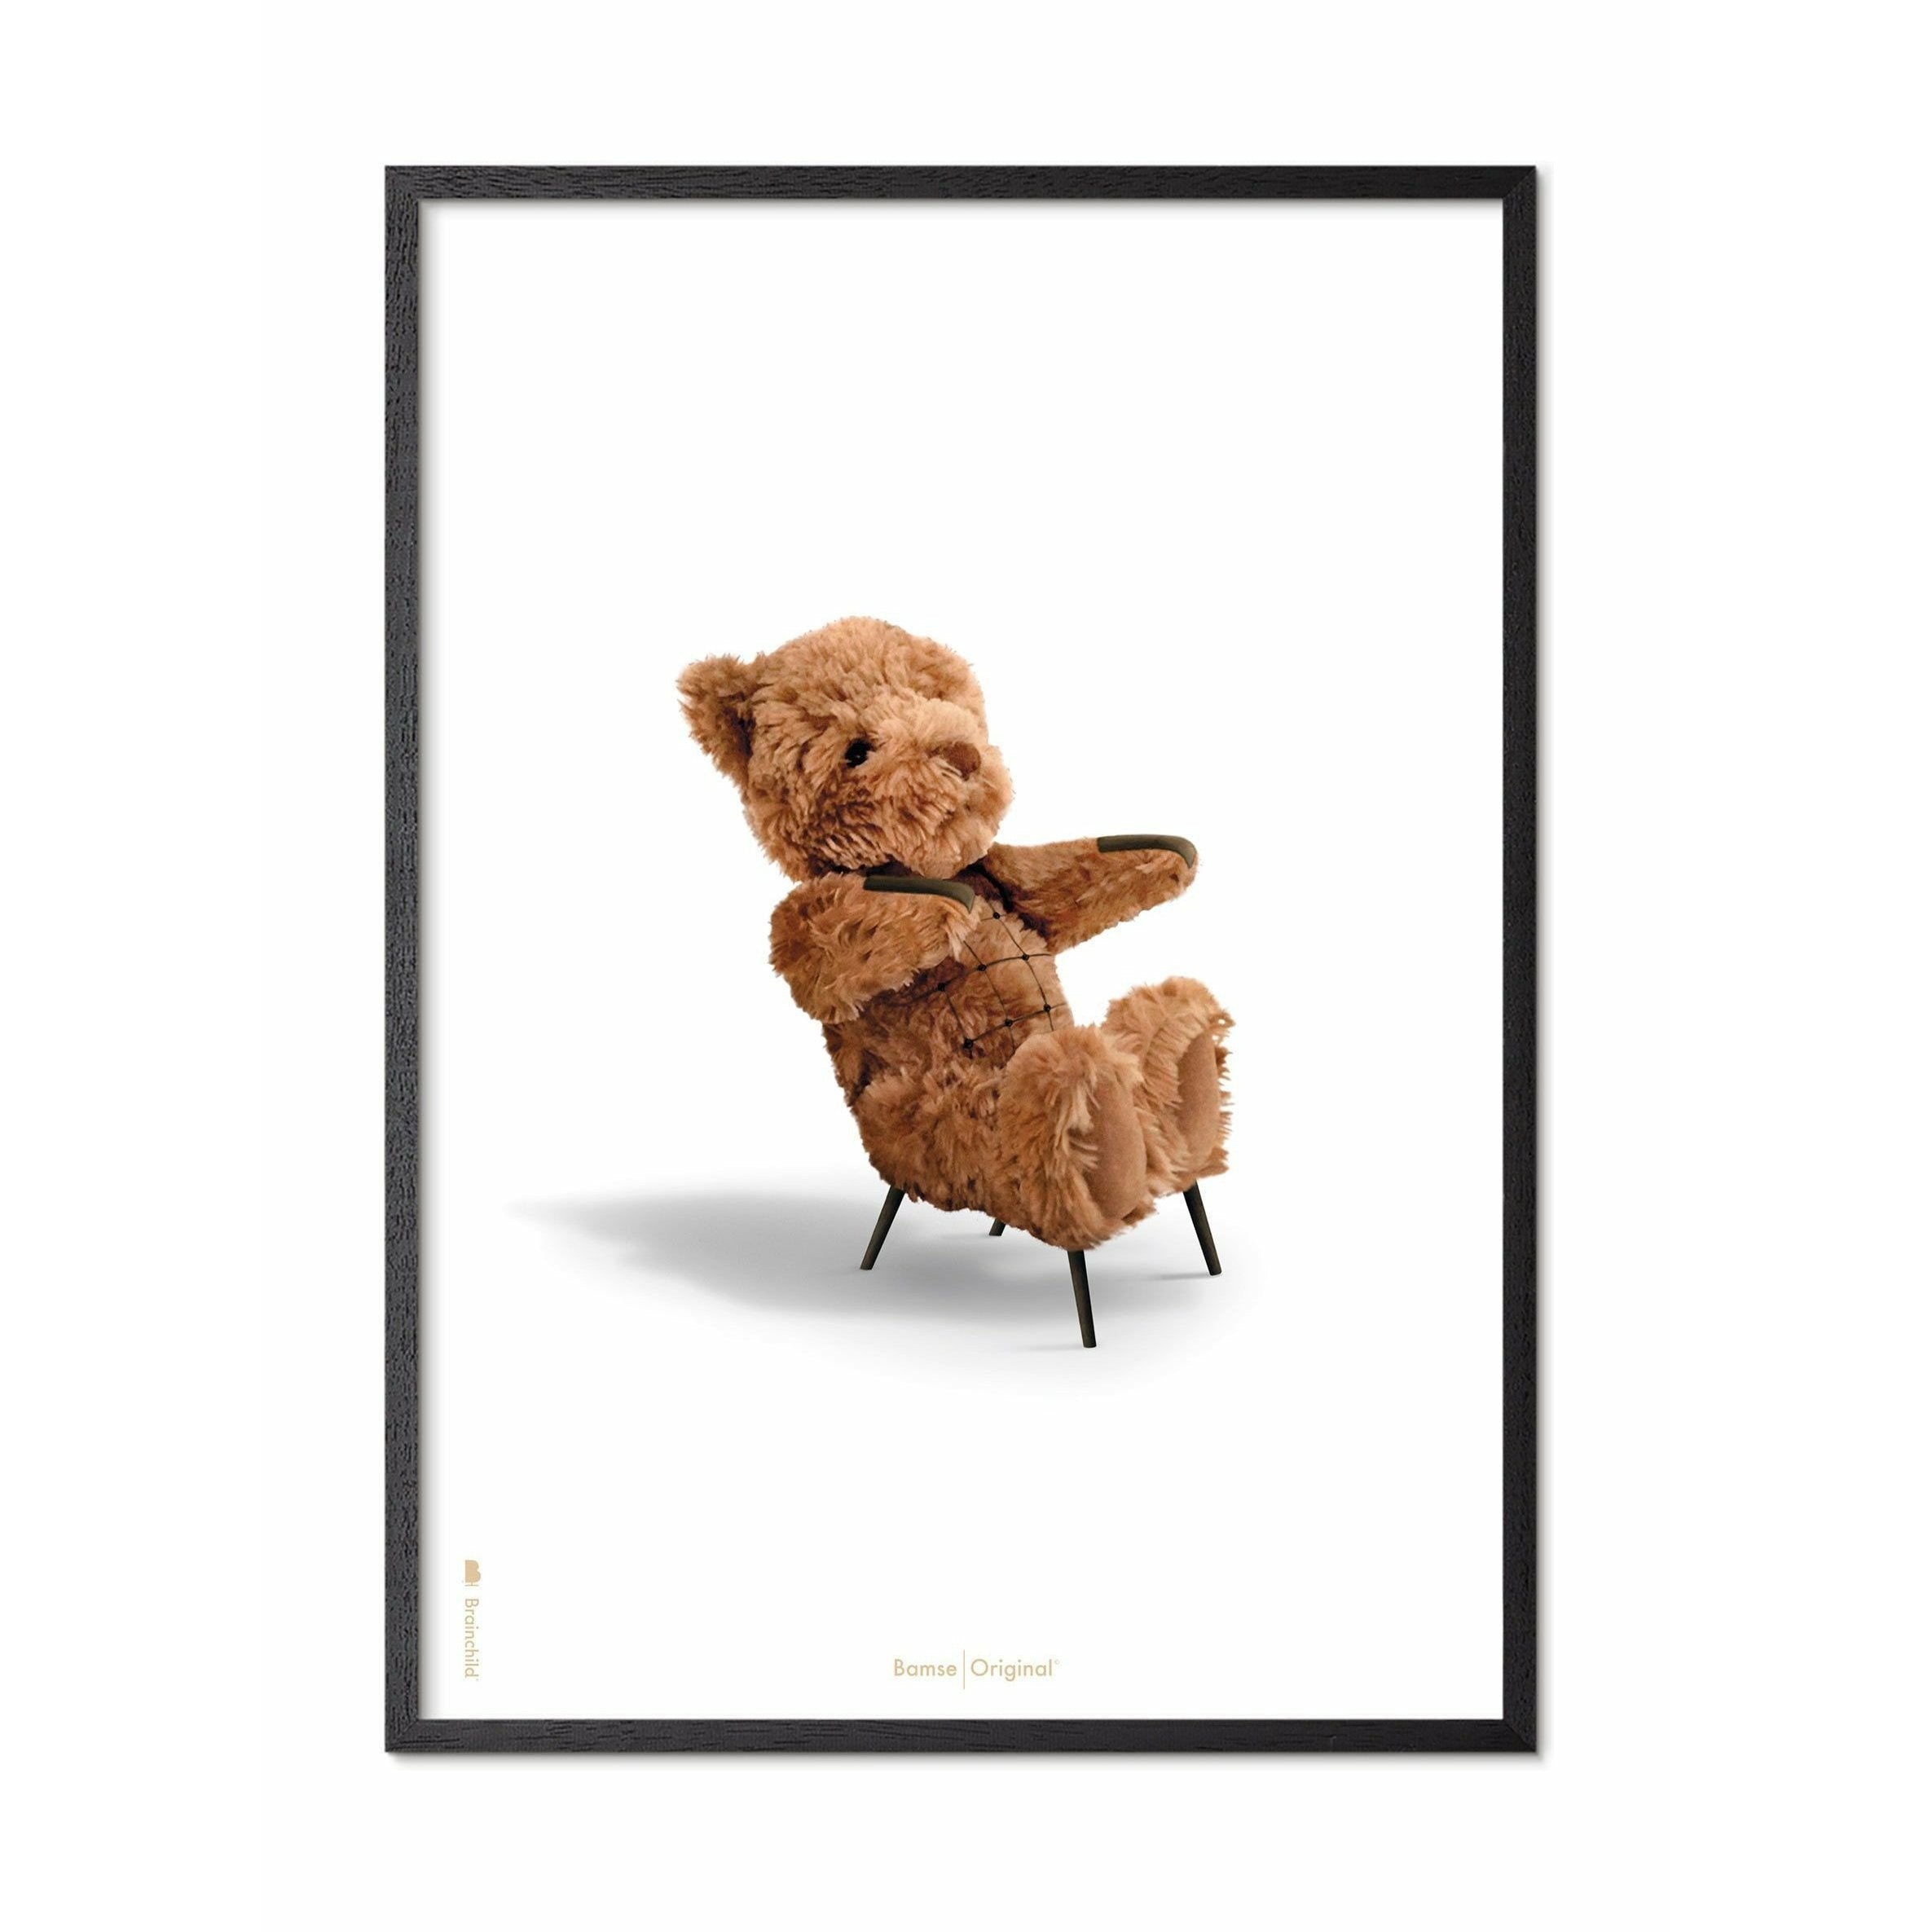 Brainchild Teddy Bear Classic Poster, Frame In Black Lacquered Wood 70x100 Cm, White Background